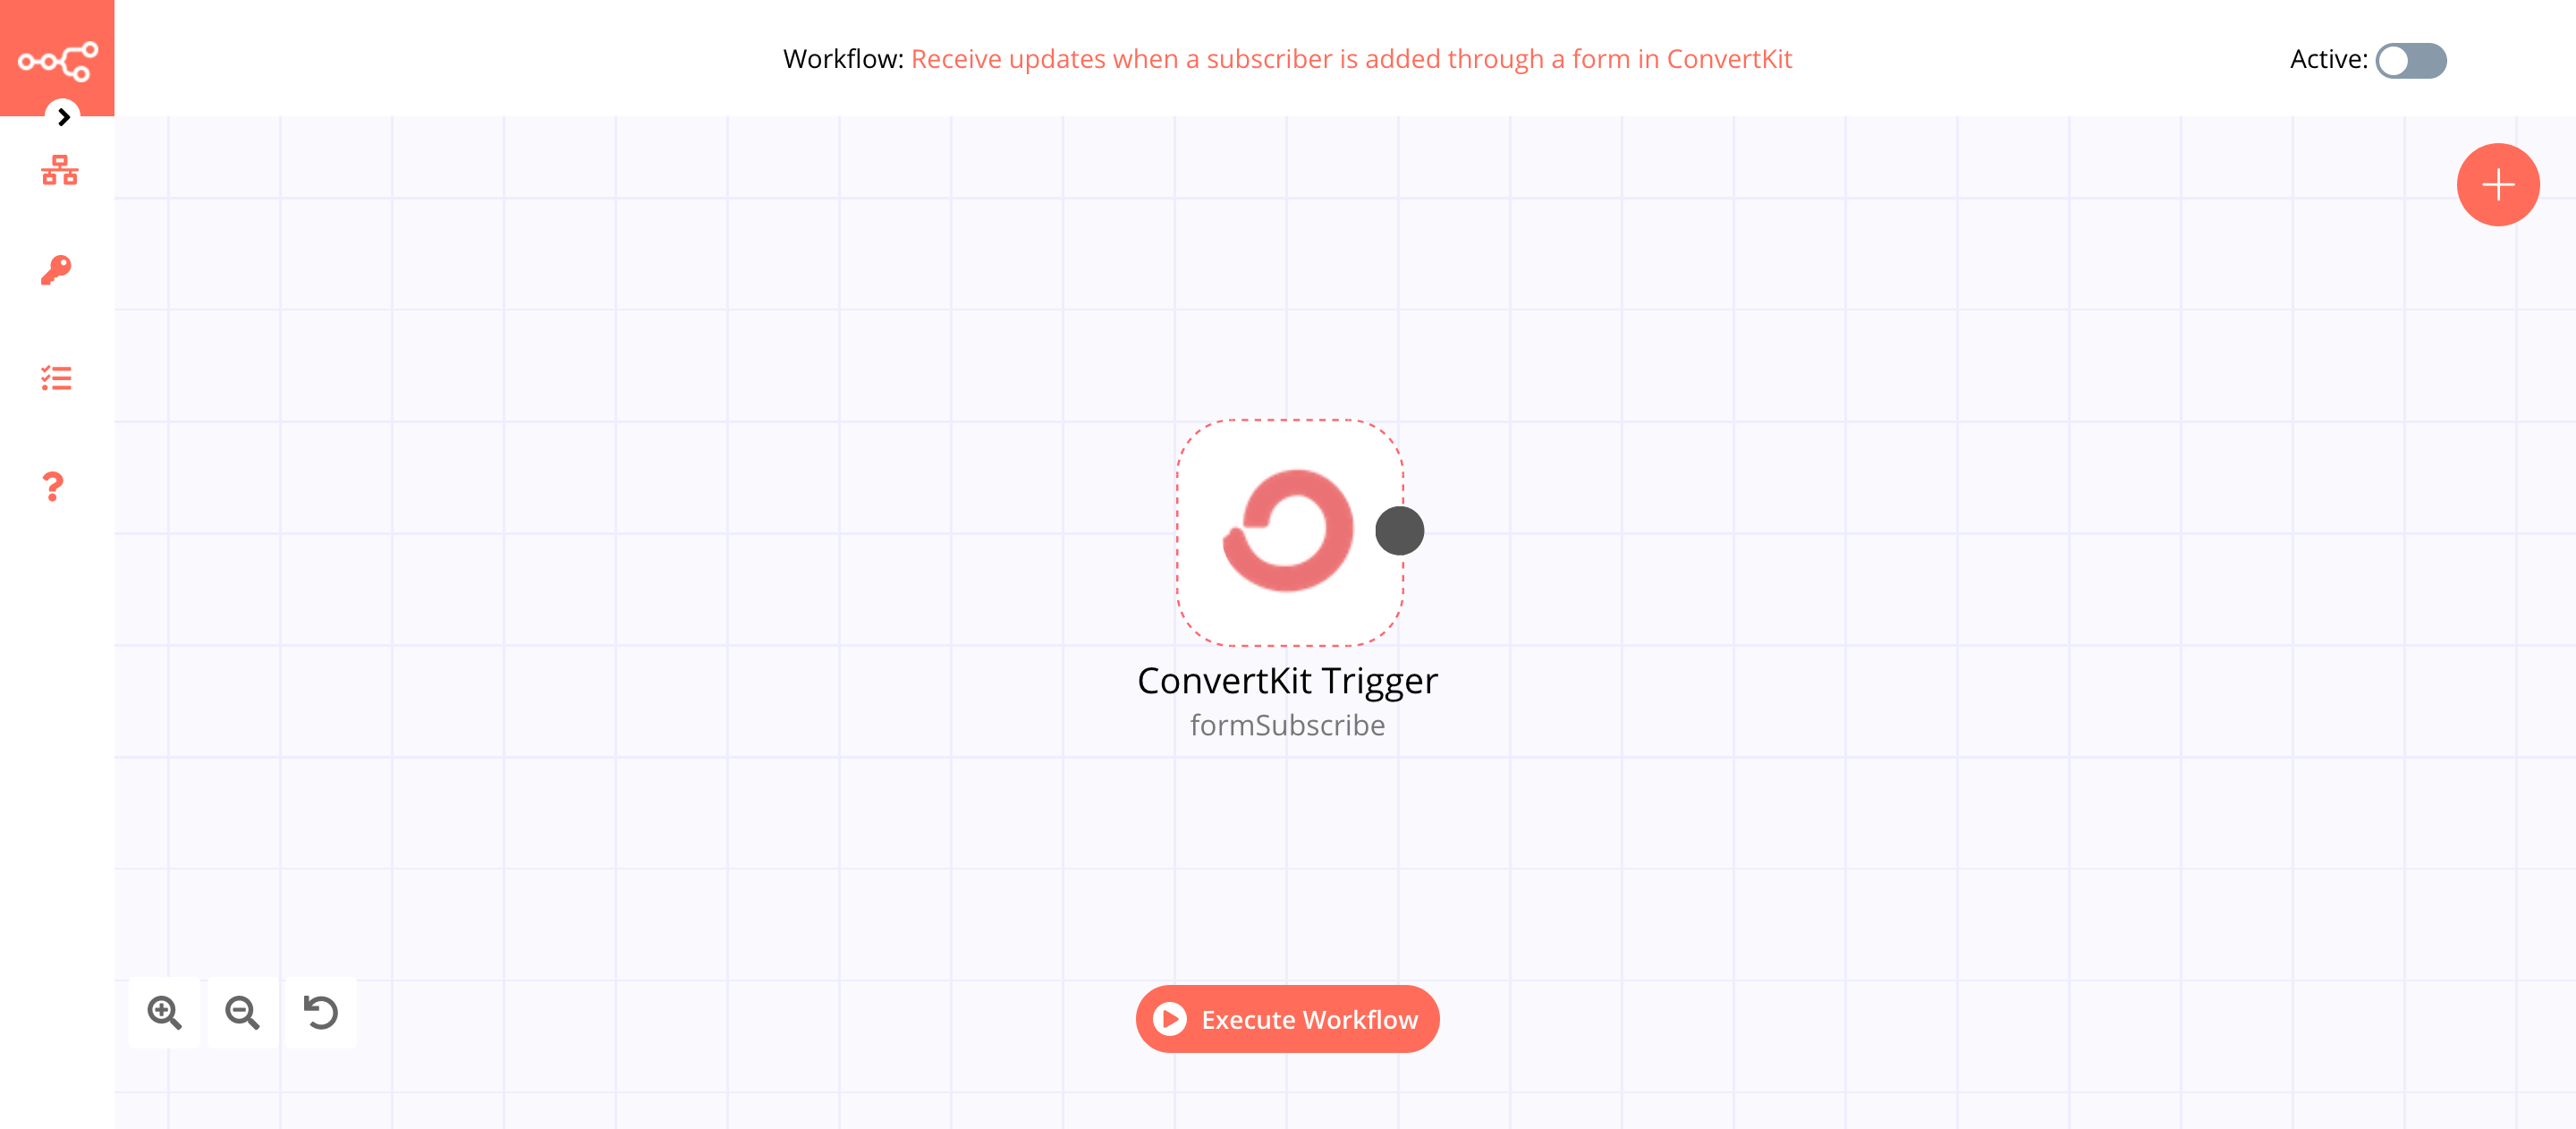 A workflow with the ConvertKit Trigger node